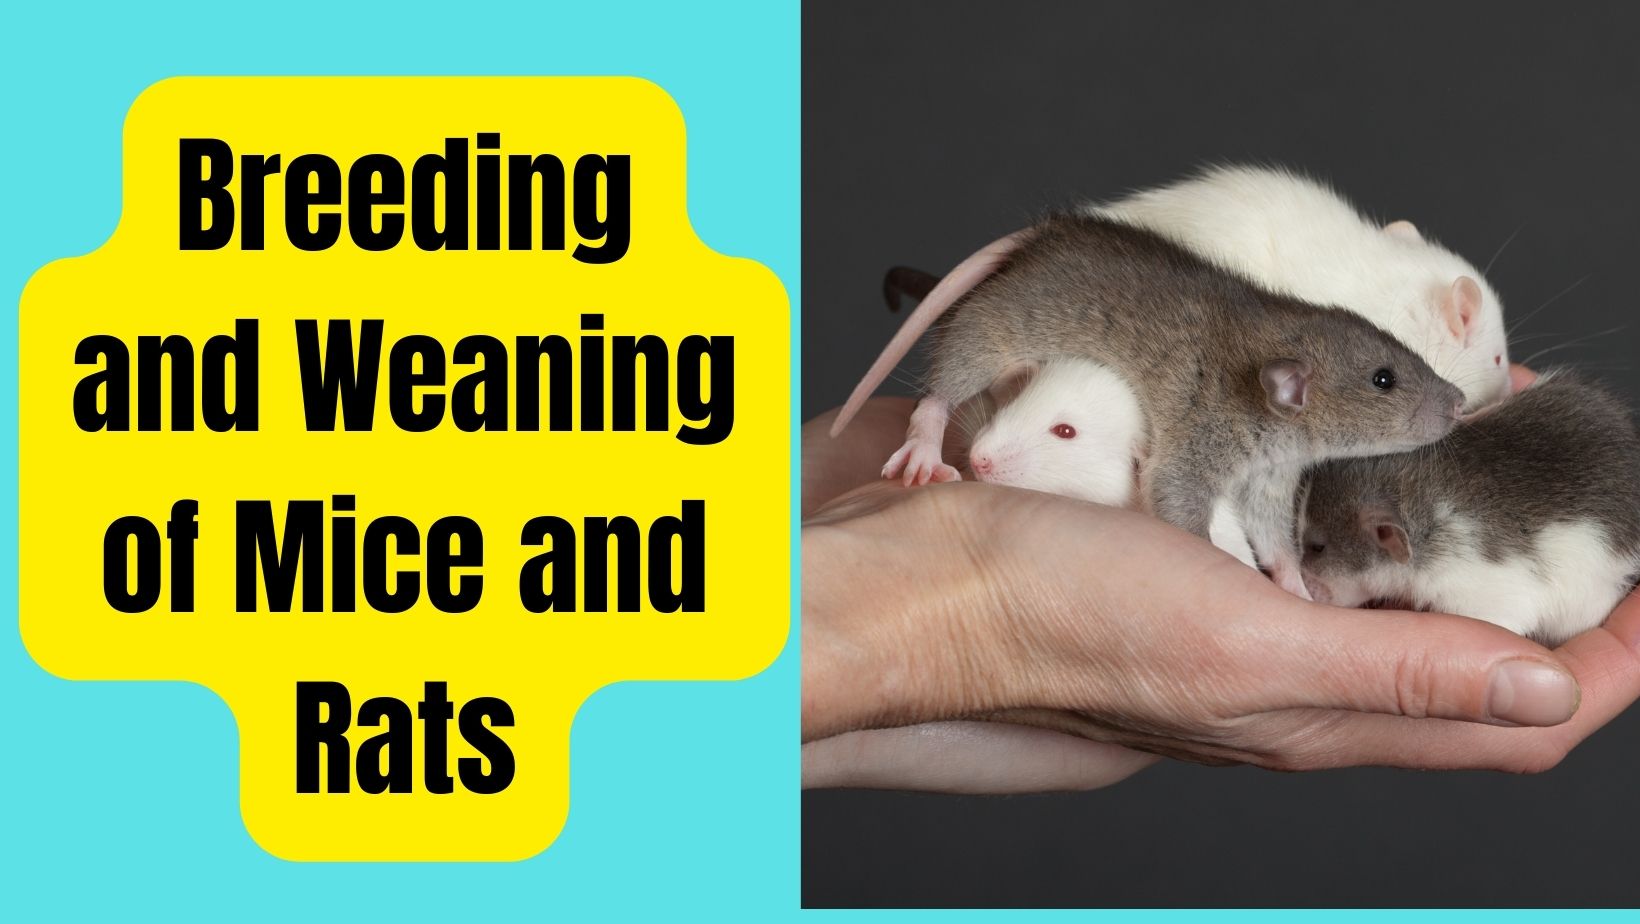 Breeding and Weaning of Mice and Rats